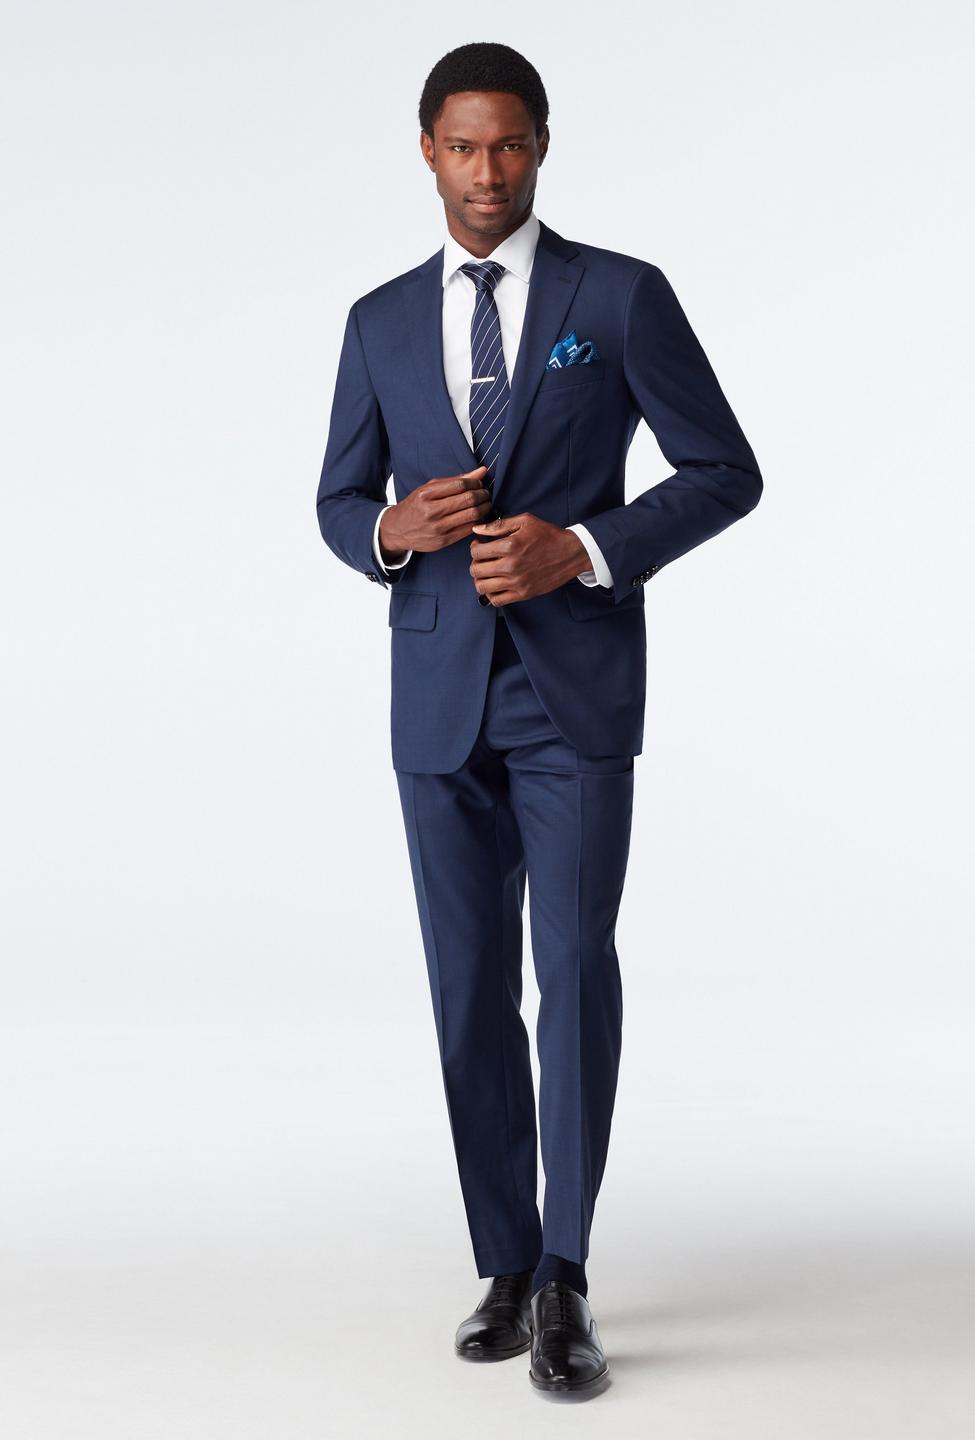 Navy suit - Howell Solid Design from Luxury Indochino Collection